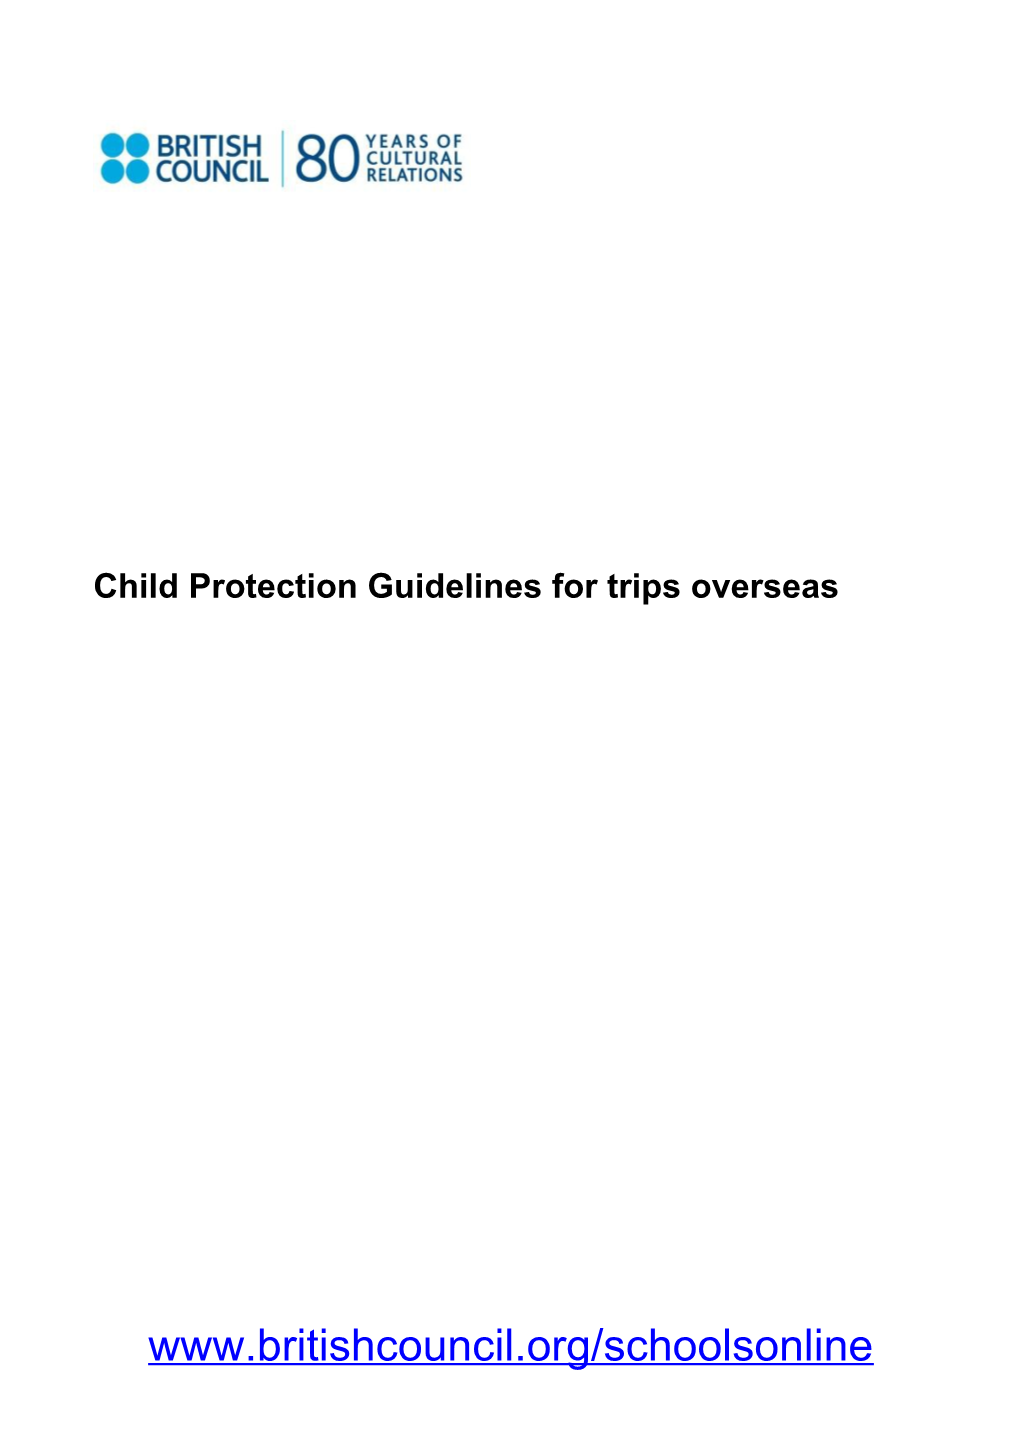 Child Protection Guidelines for Trips Overseas